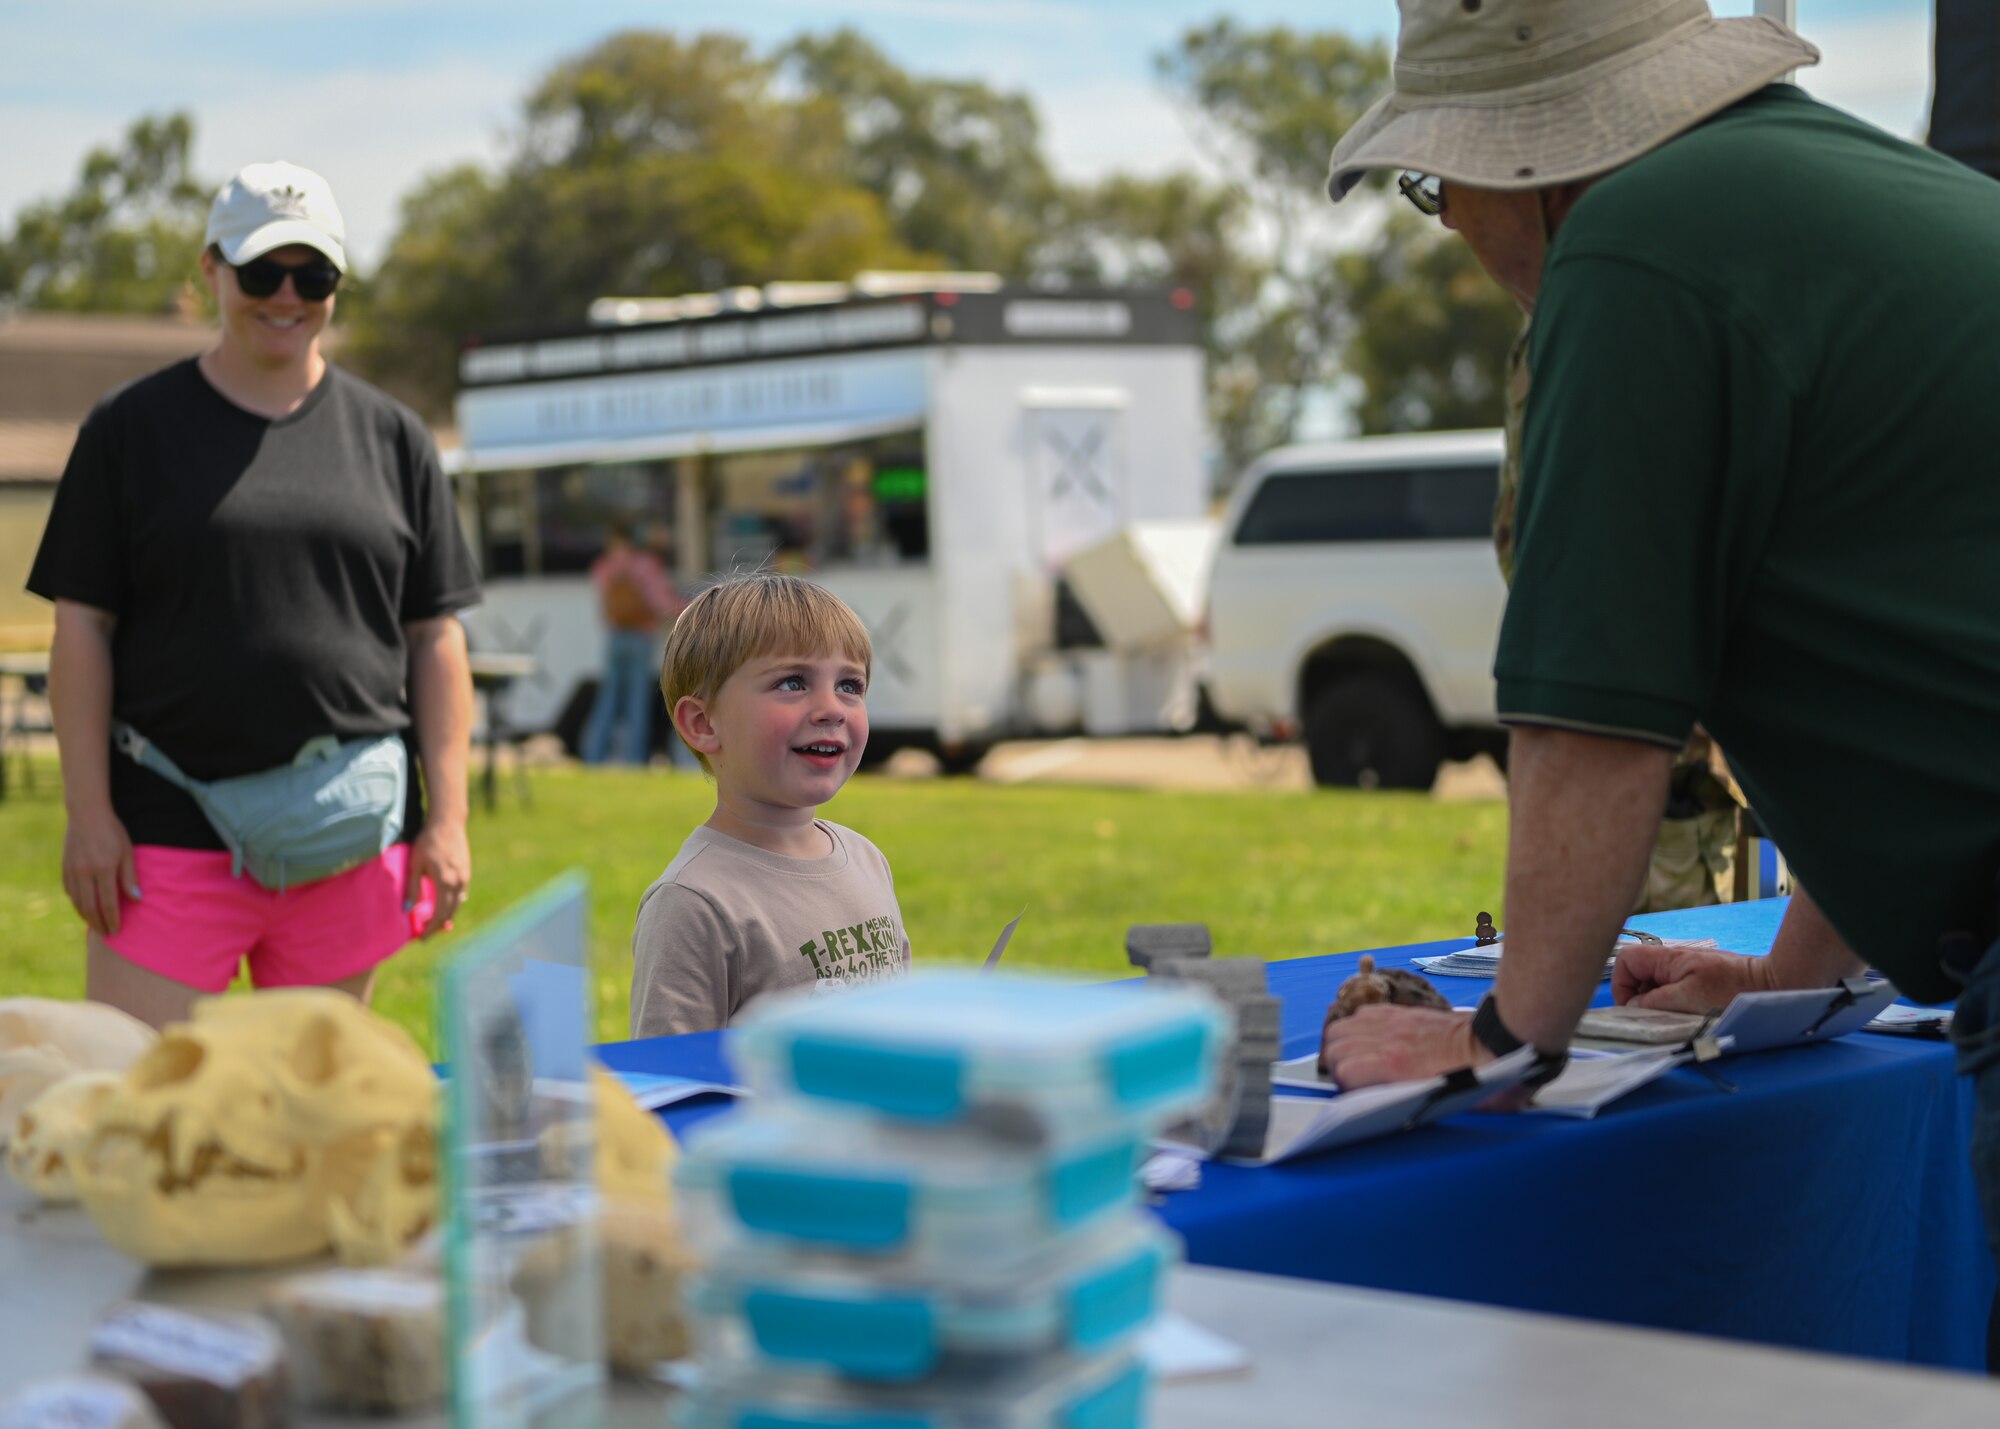 A child talks to a booth attendant at an outdoor exibit.